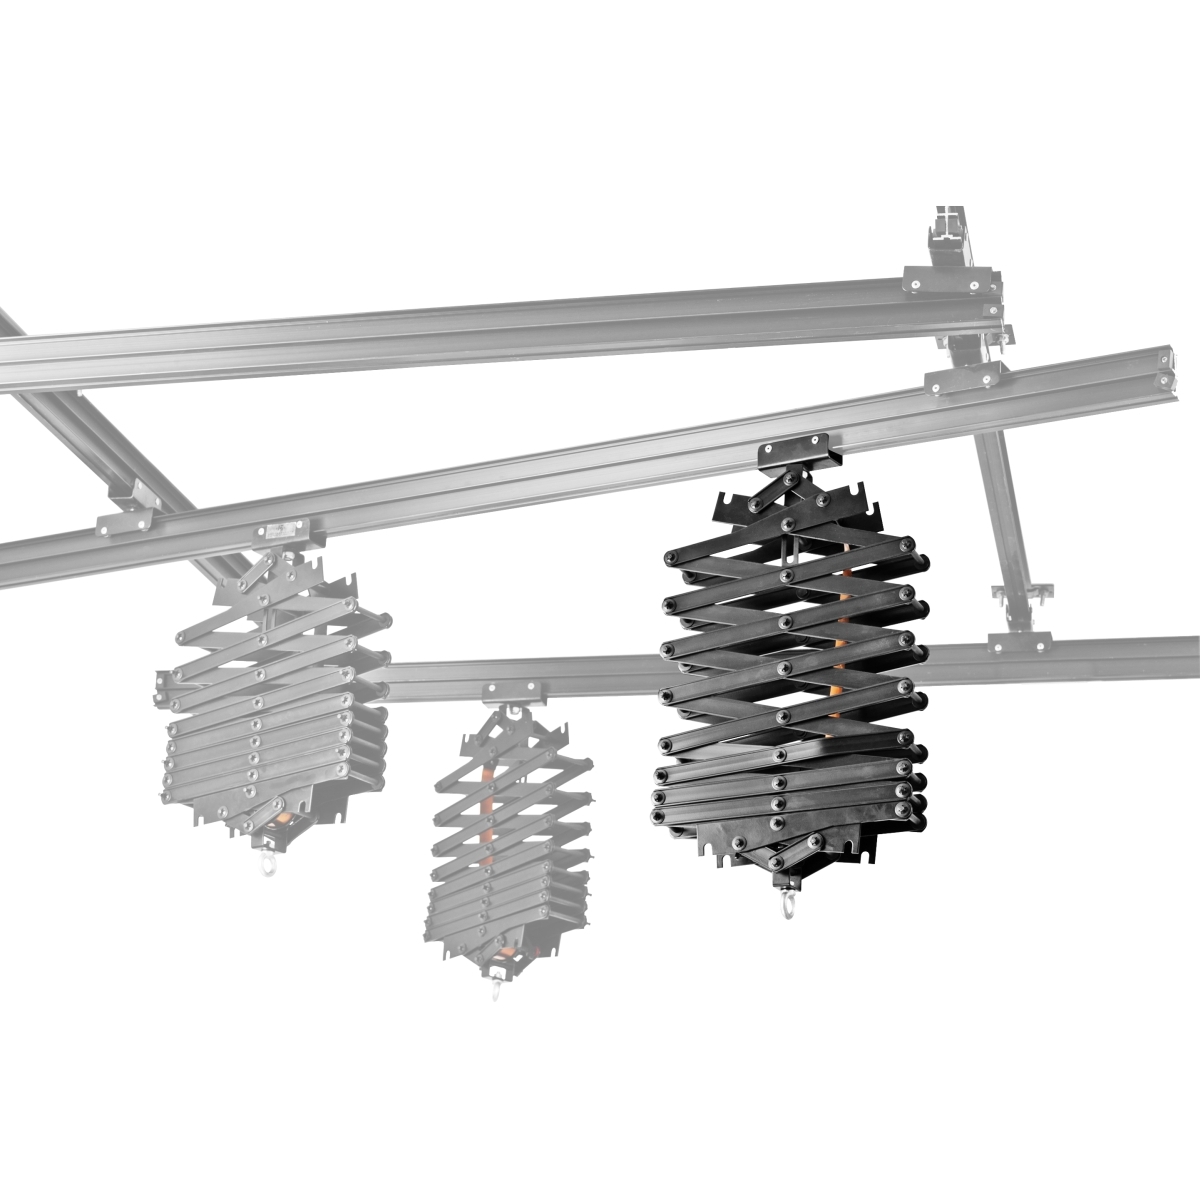 Walimex Pantograph for Ceiling Rail System